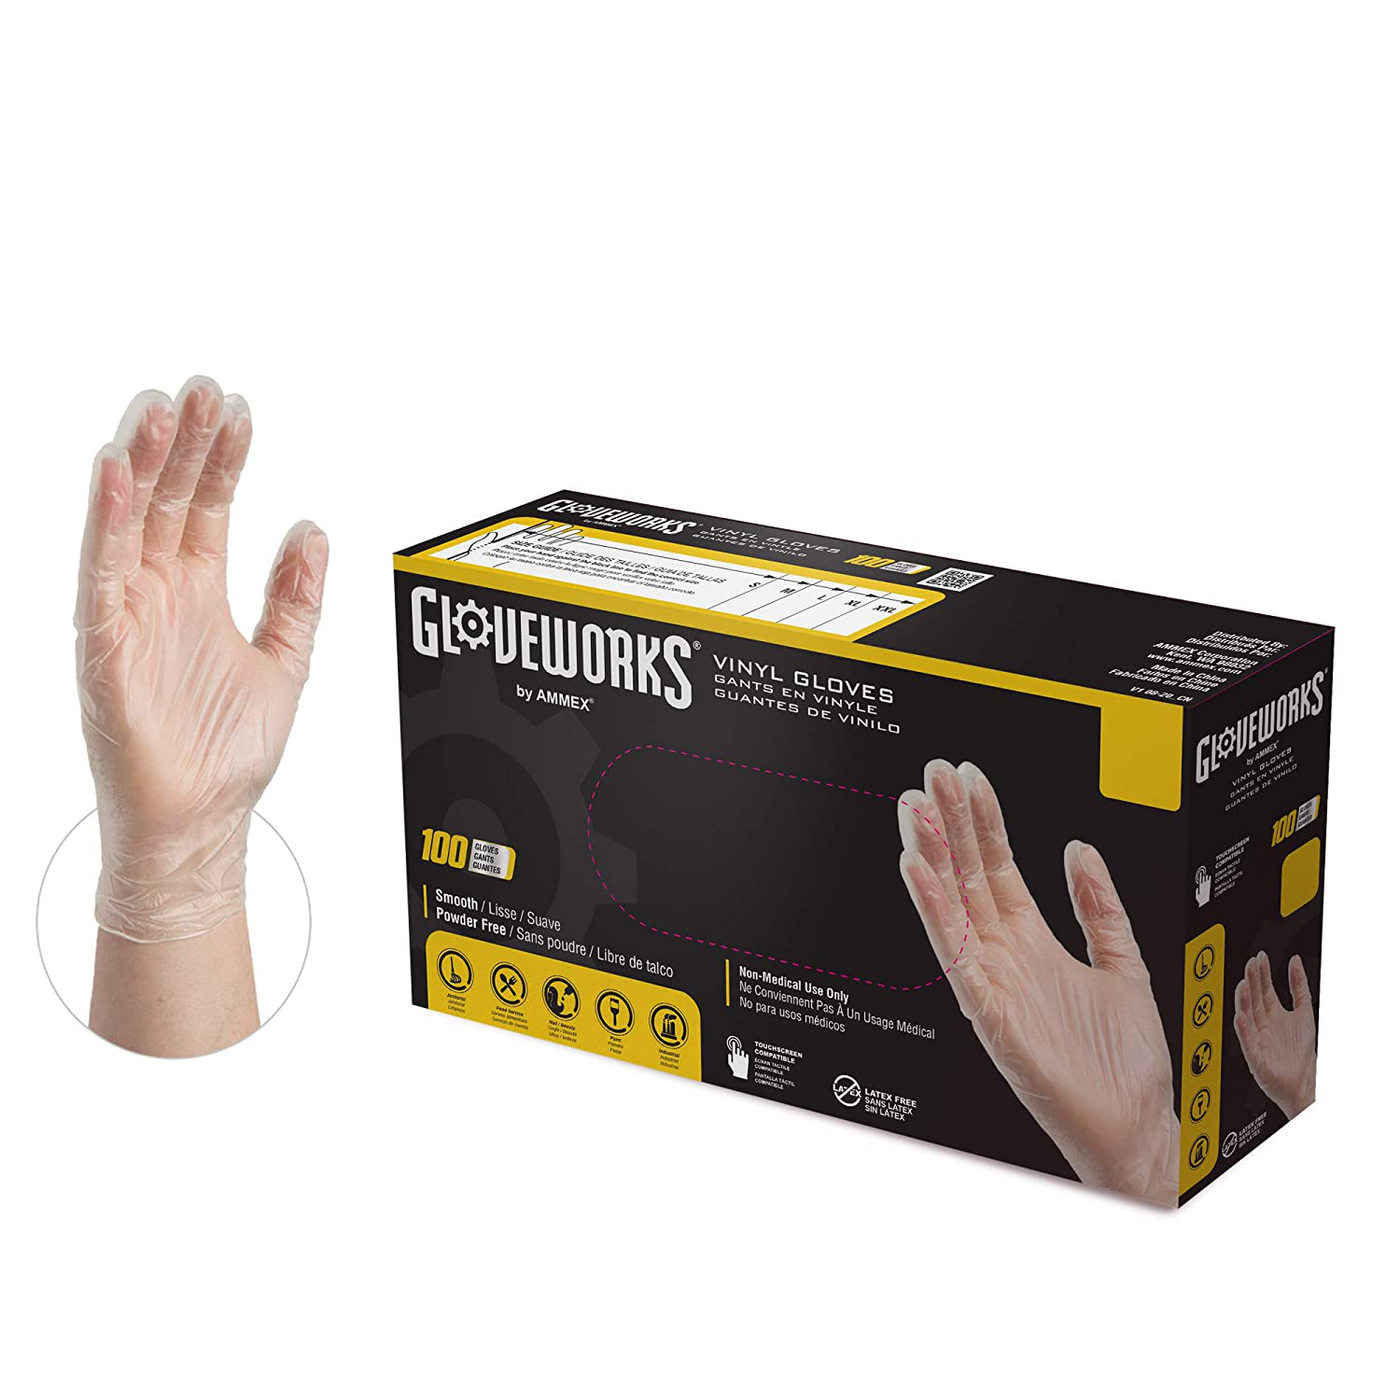 GLOVEWORKS Clear Vinyl Industrial Gloves, Box of 100, 3 Mil, Size Small, Latex Free, Powder Free, Food Safe, Disposable, Non-Sterile, IVPF42100-BX